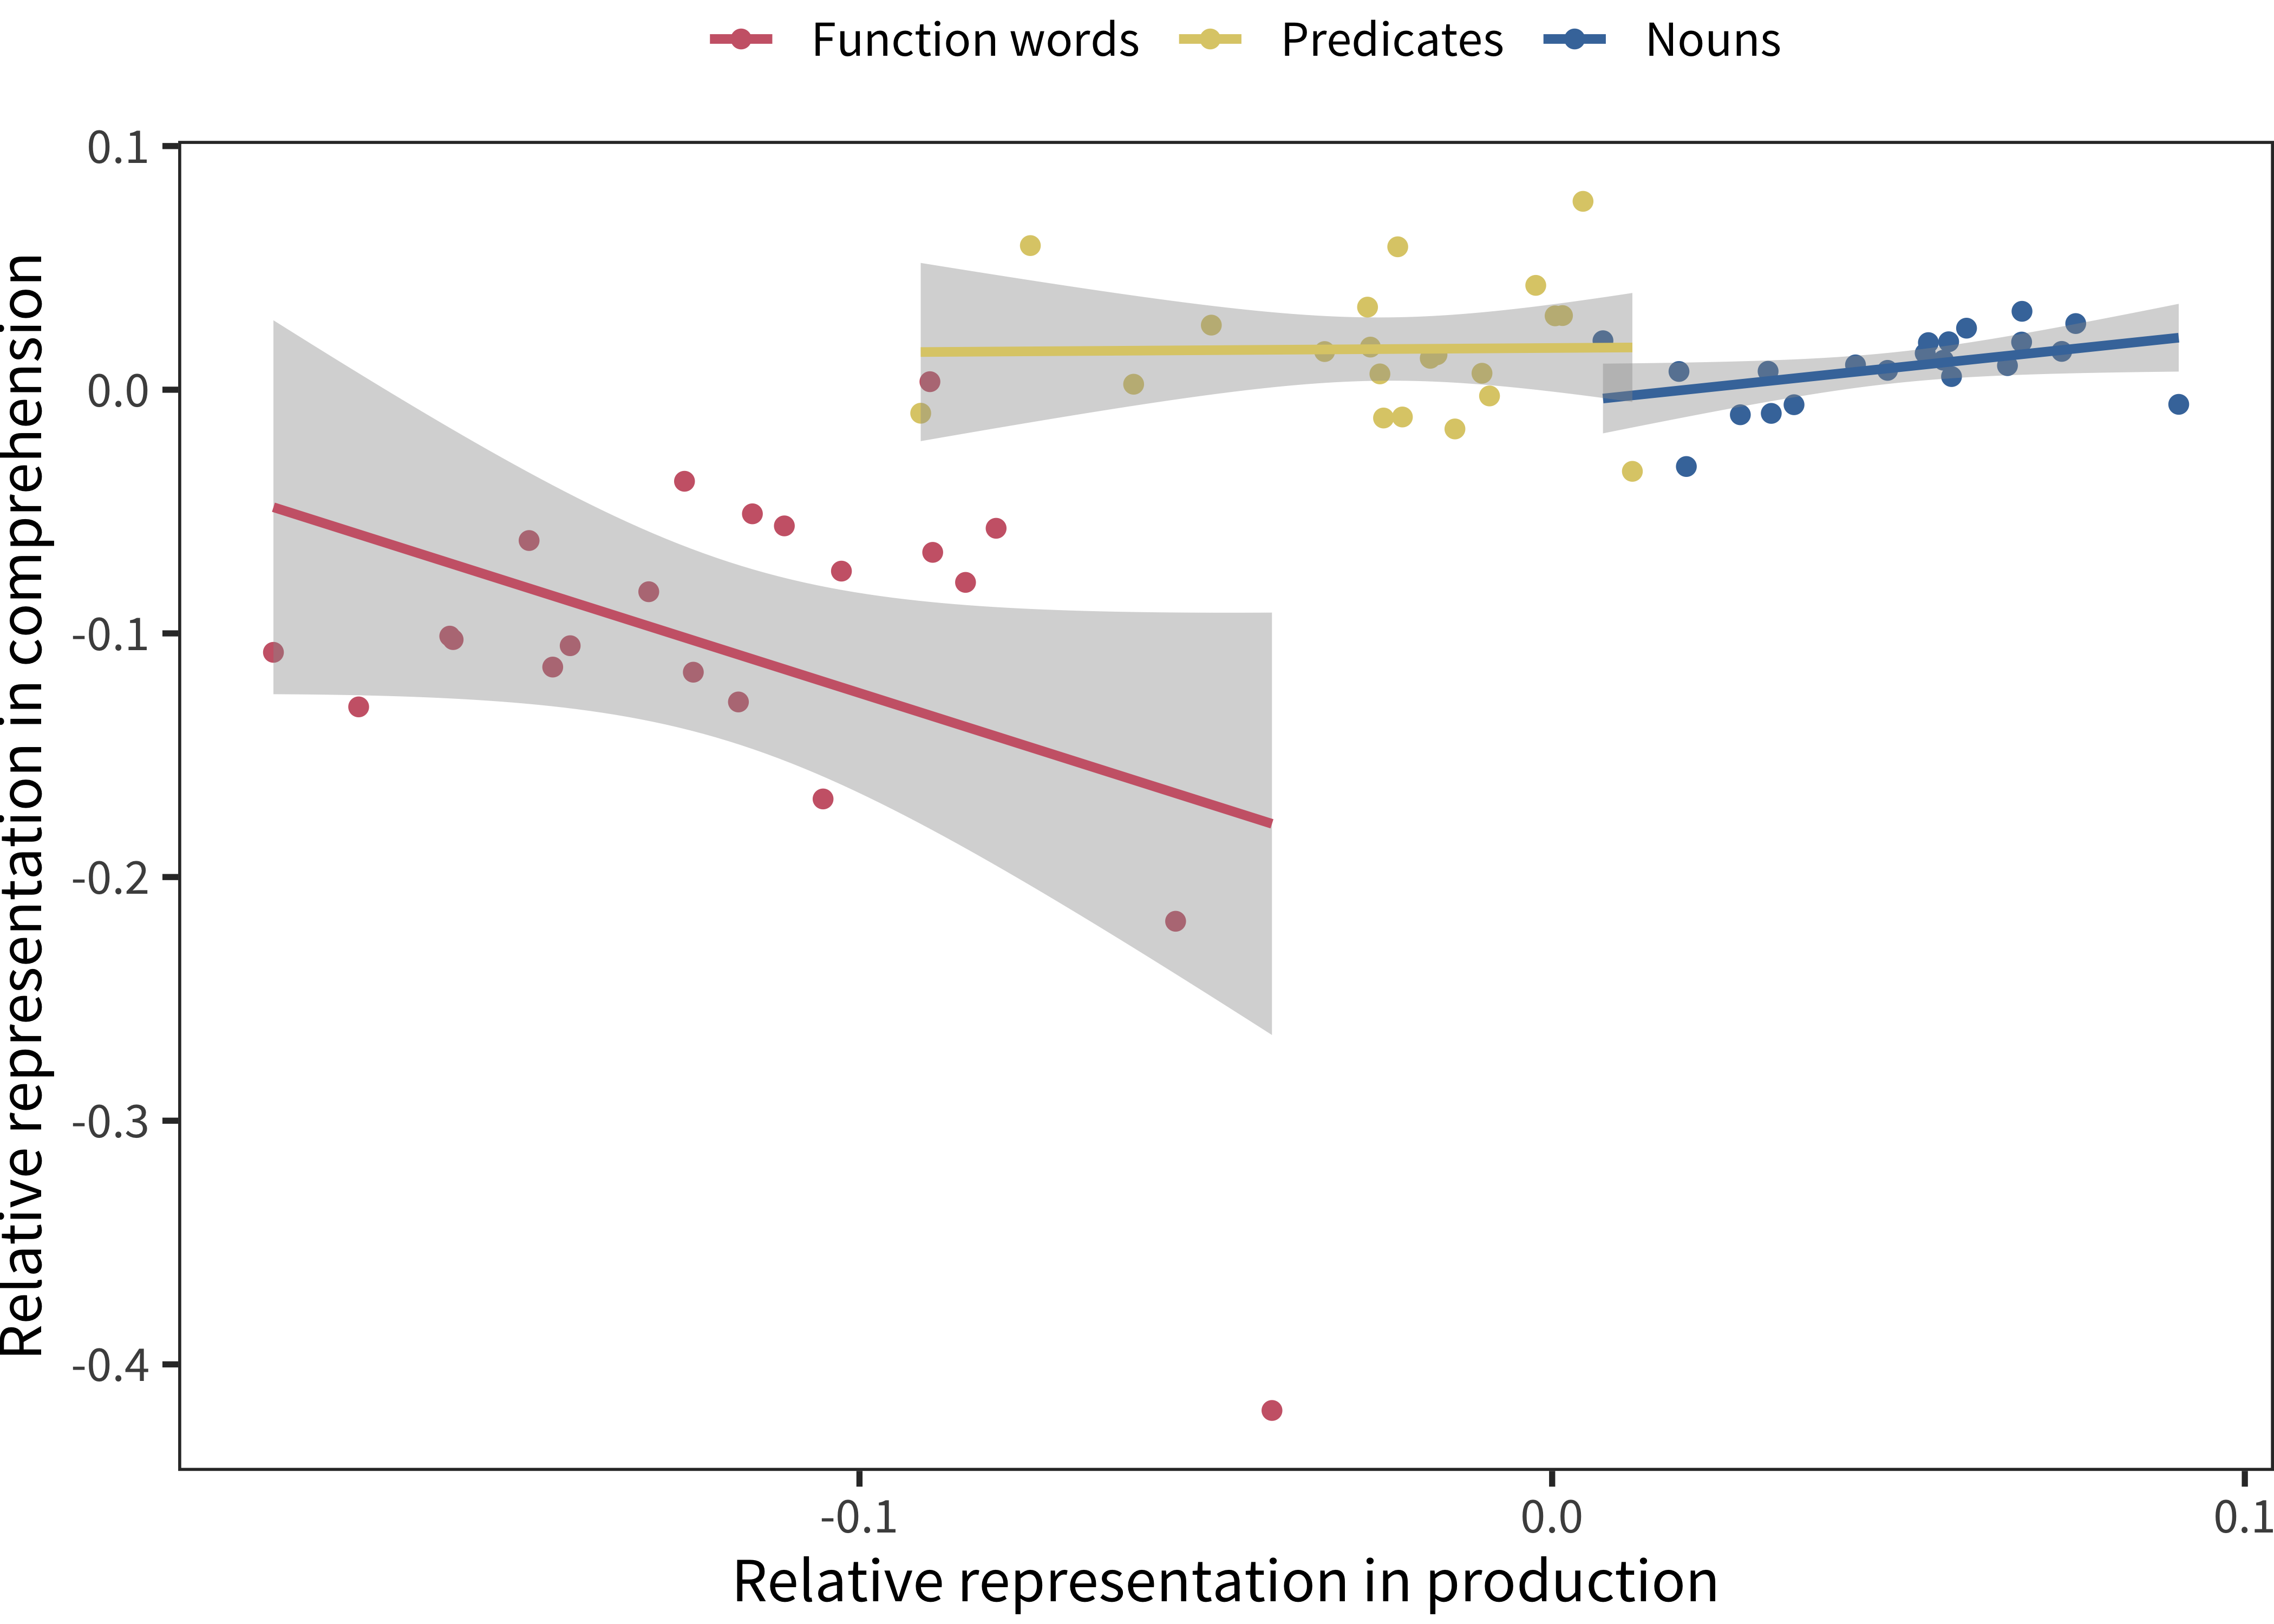 Relative representation in vocabulary for each lexical category for comprehension data compared to prooduction data in each language (lines indicates linear regression fits).